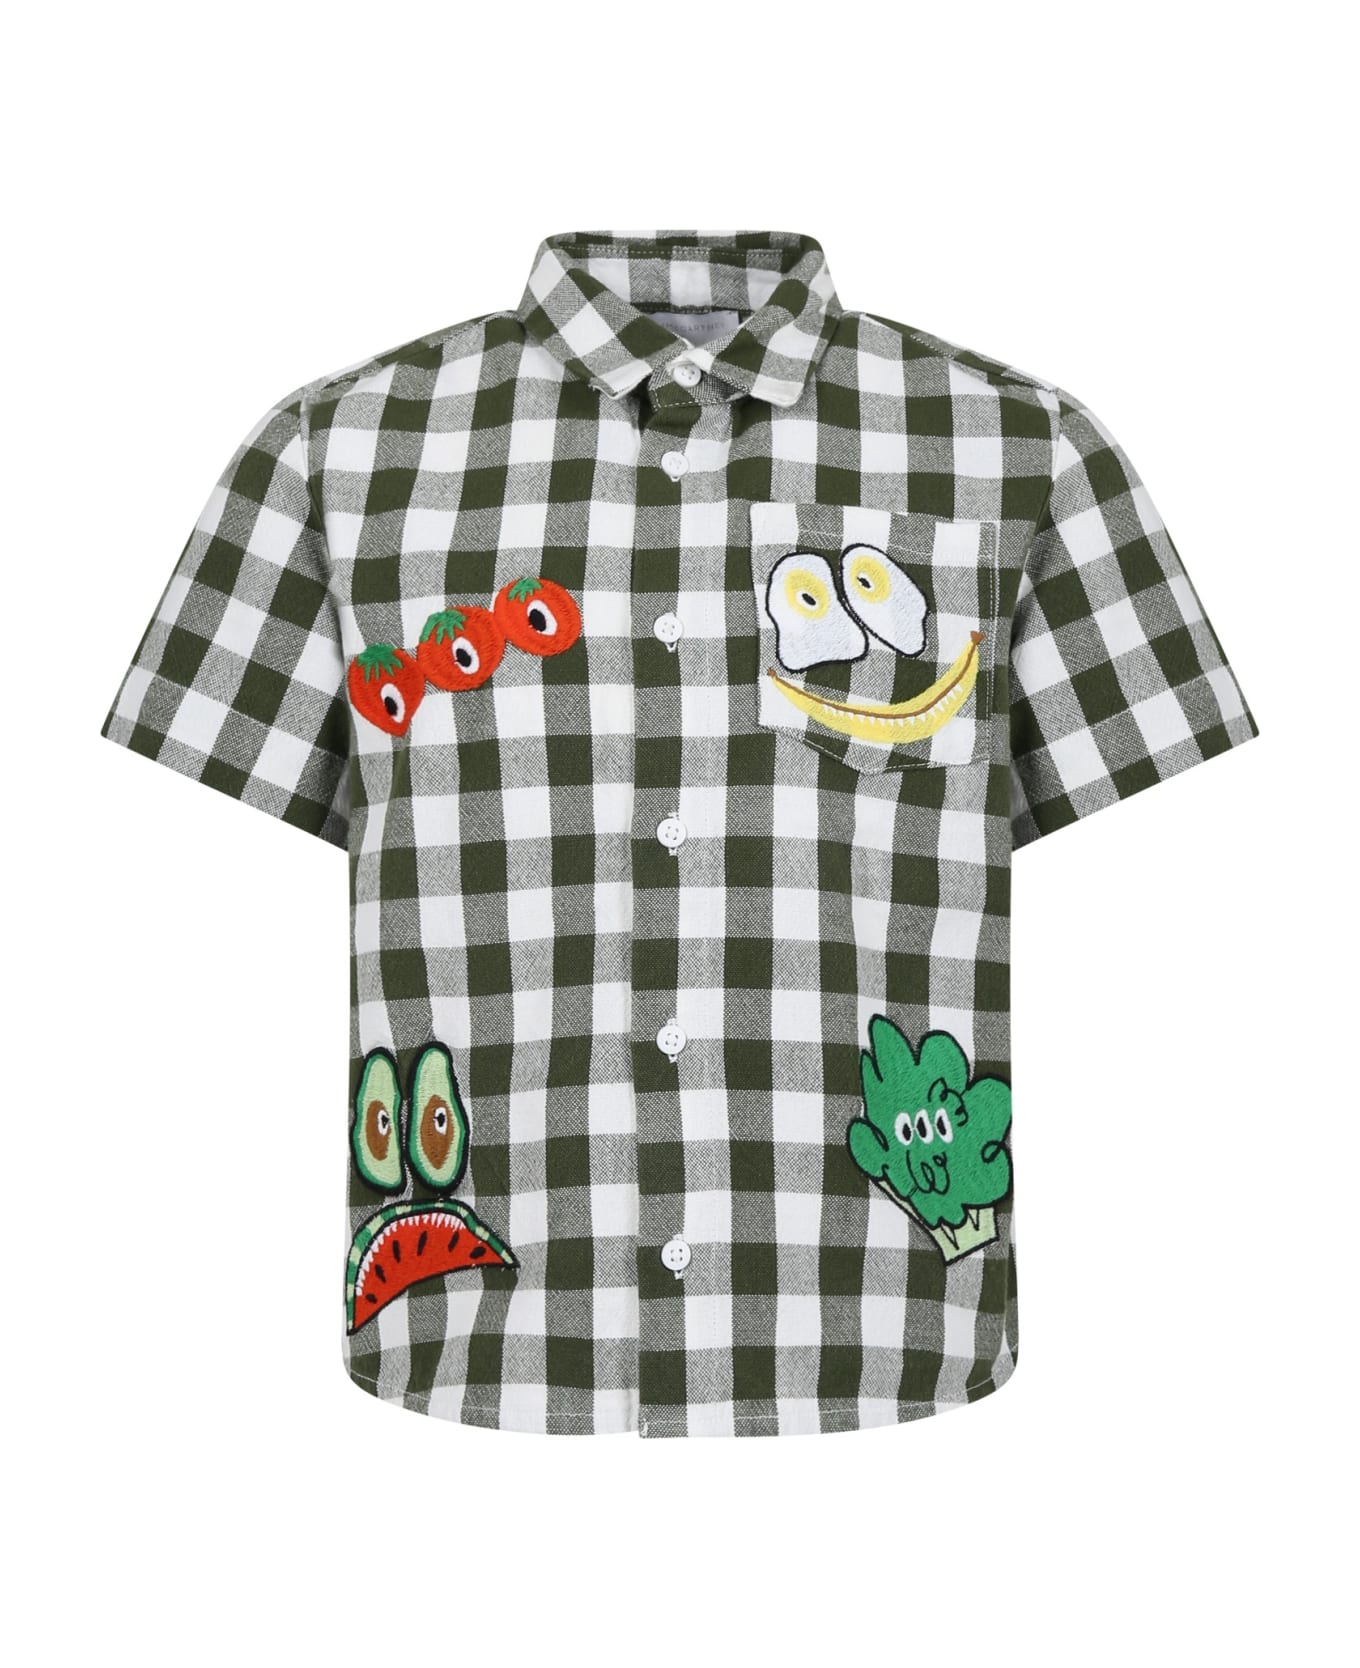 Stella McCartney Kids Green Shirt For Boy With All-over Pattern - Green